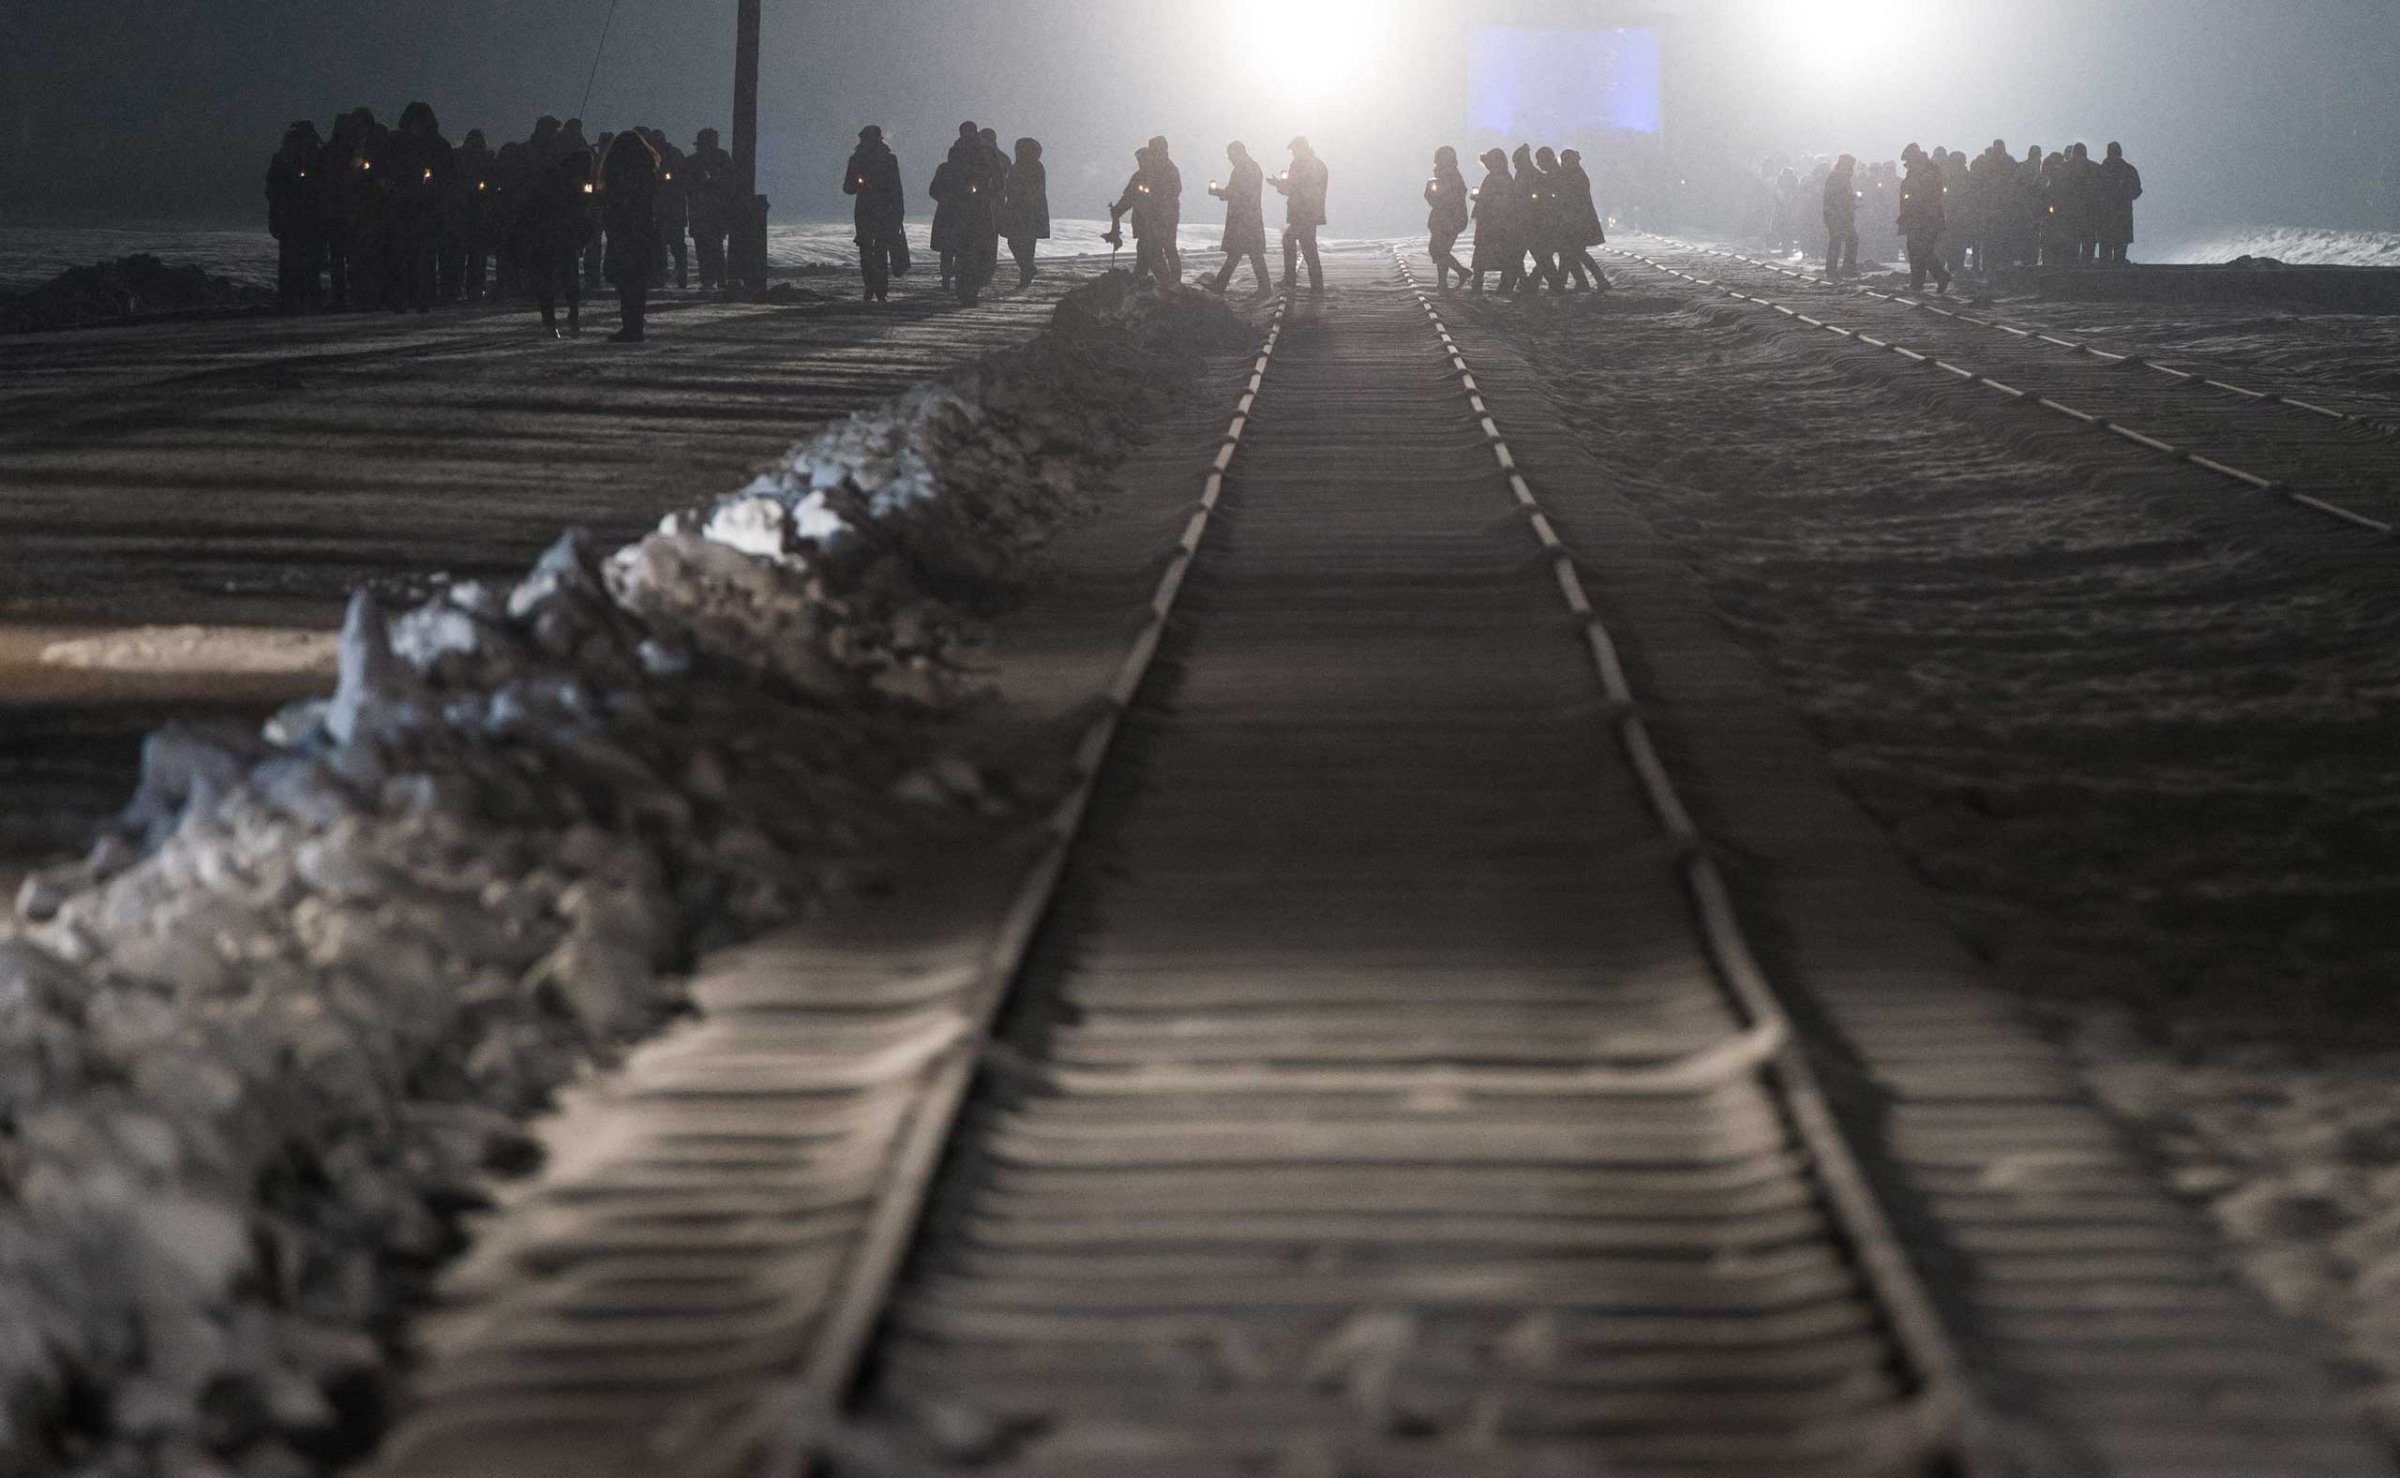 Auschwitz survivors and families visit the Birkenau Memorial carrying candles on Jan. 27, 2015 in Oswiecim, Poland.